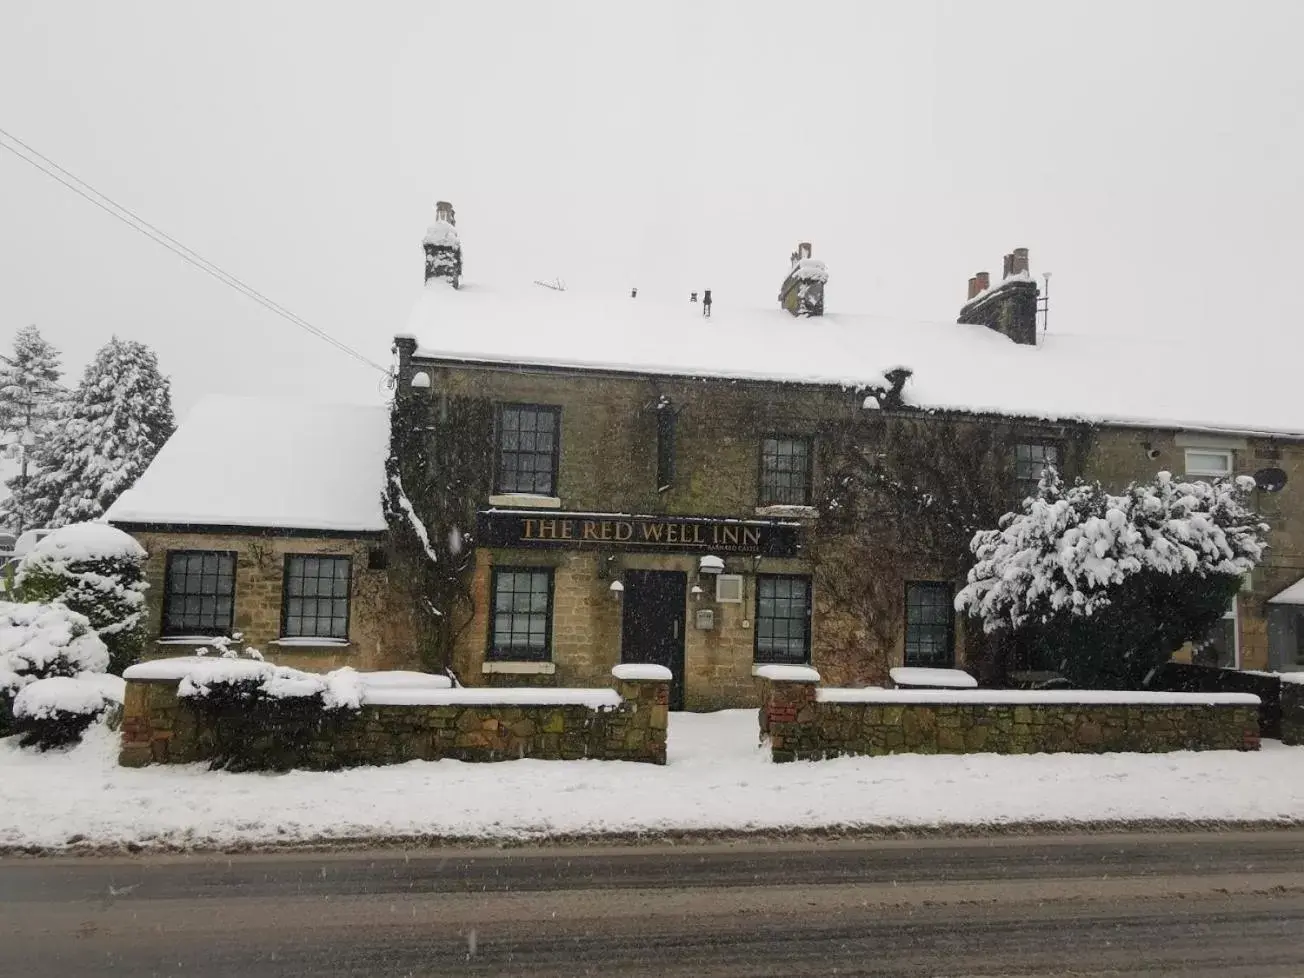 Property building, Winter in The Redwell Inn